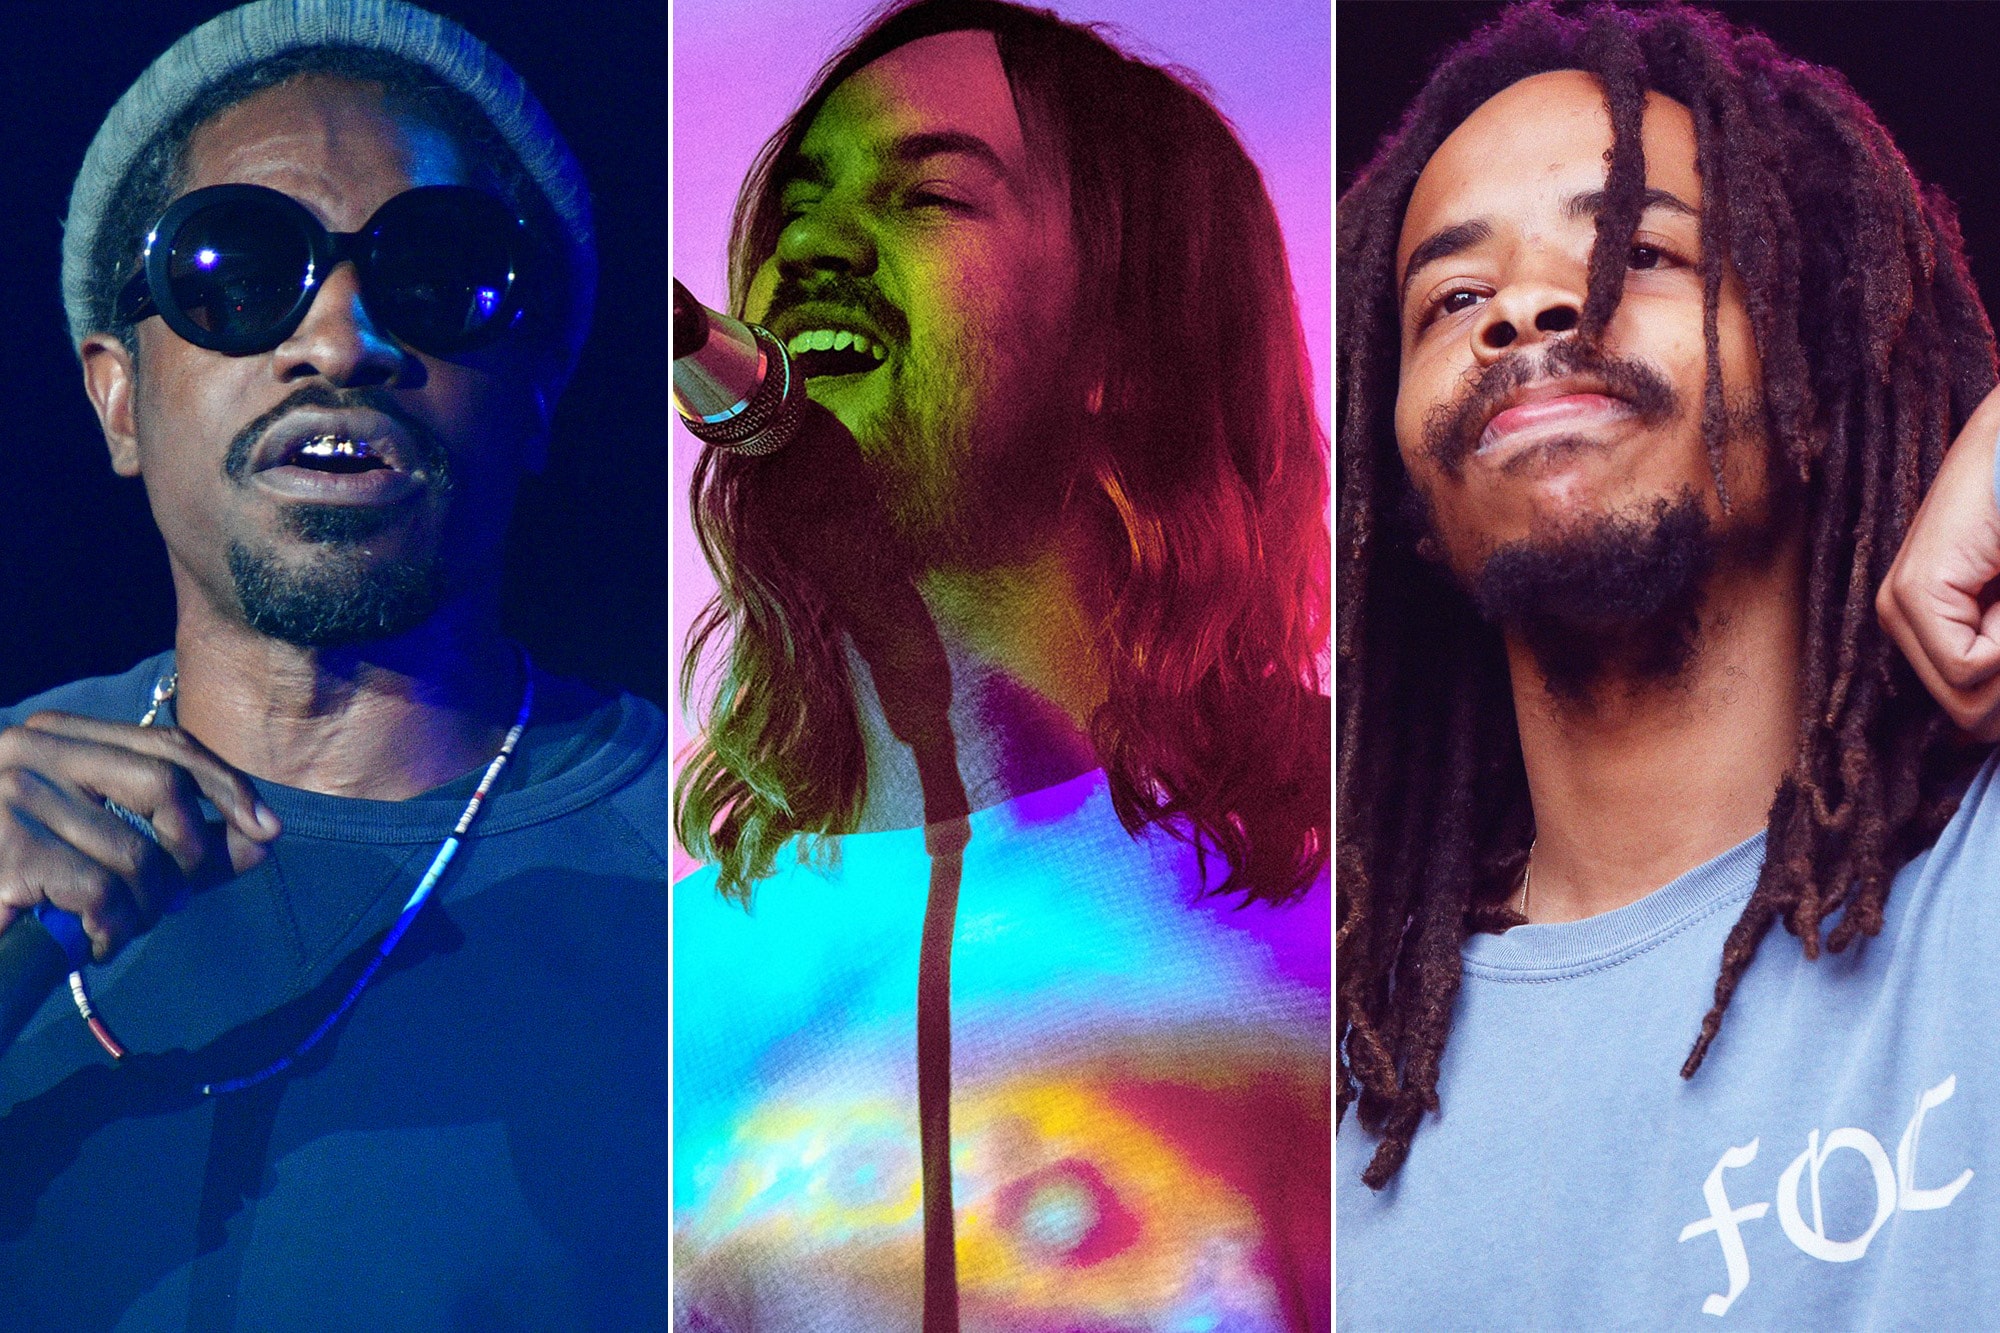 10 Other-Worldly Music Videos to Lose Yourself In A$AP Rocky Blockhead Moby Thom Yorke 'Suspiria' Tame Impala The Pharcyde Snoop Dogg Earl Sweatshirt Fatboy Slim OutKast Watch Online COVID-19 Coronavirus Self Isolation Quarantine What to Do Entertainment Escapism